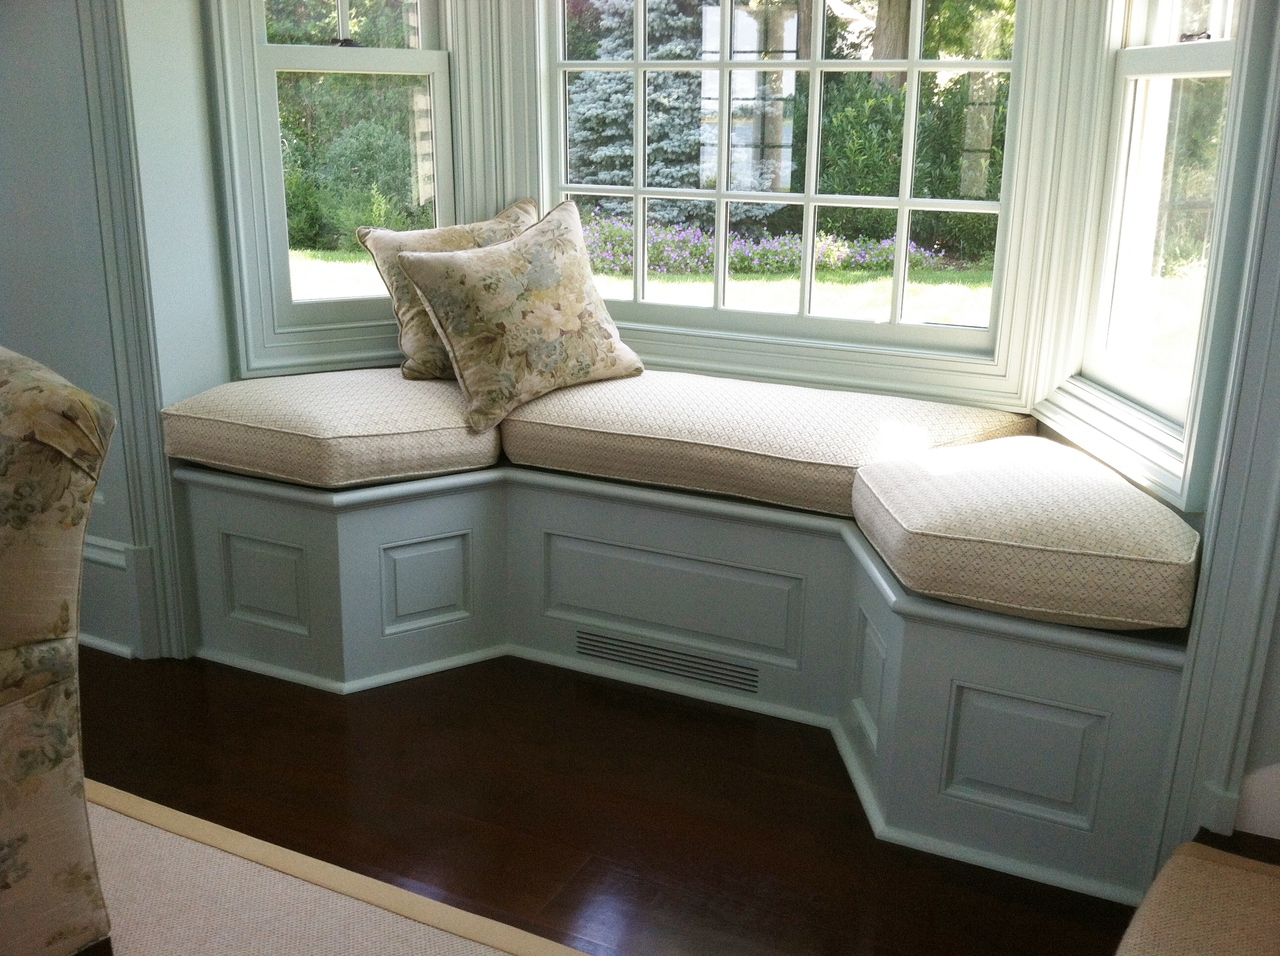 Custom Bench Cushion From Home of Wool - Stefana Silber